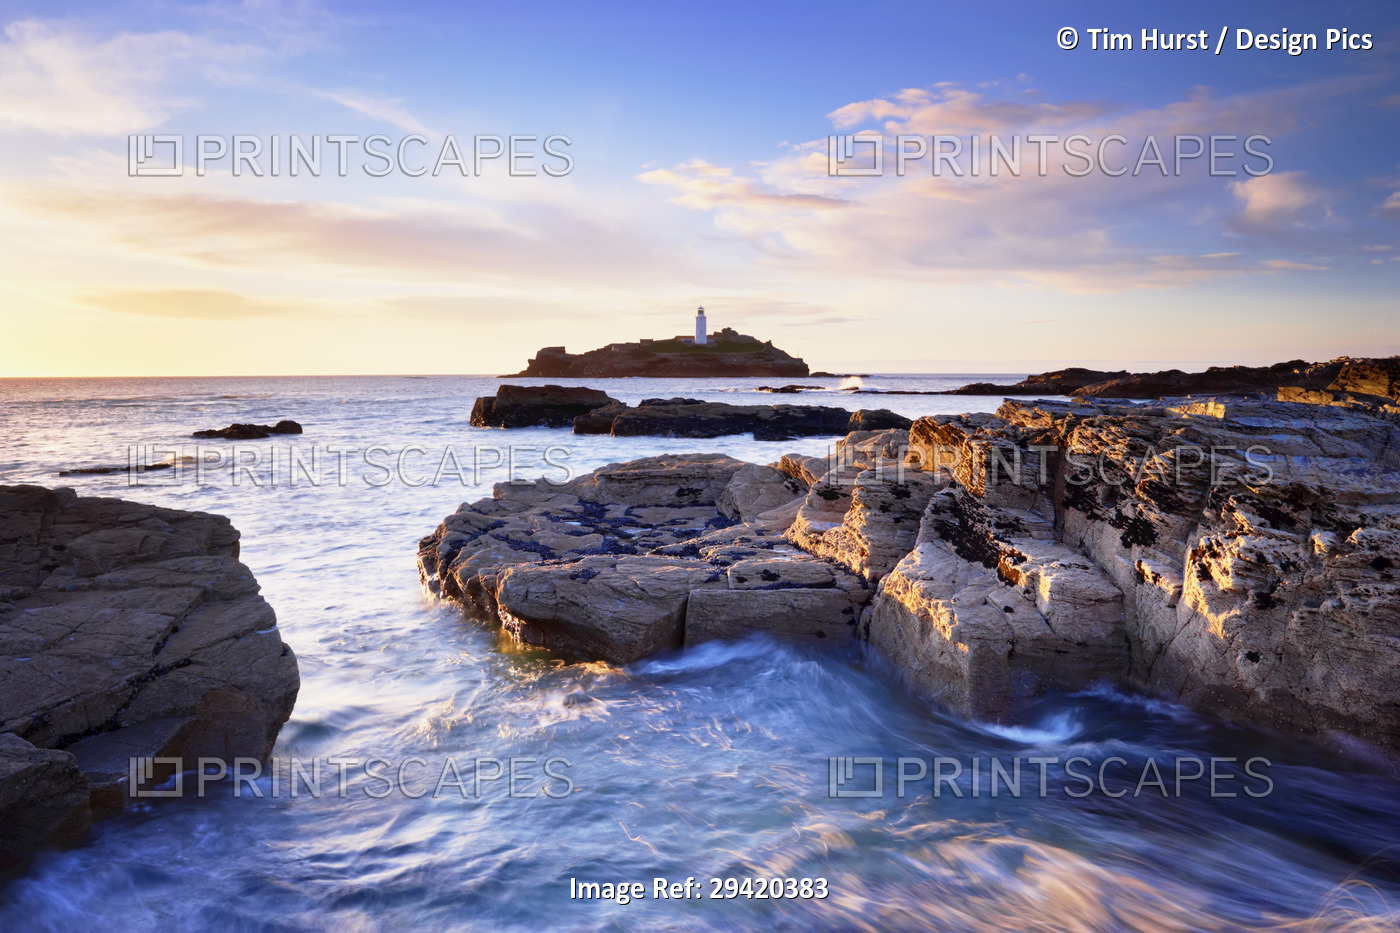 Rocky Coastline and Lighthouse, Godrevy Point, Cornwall, England